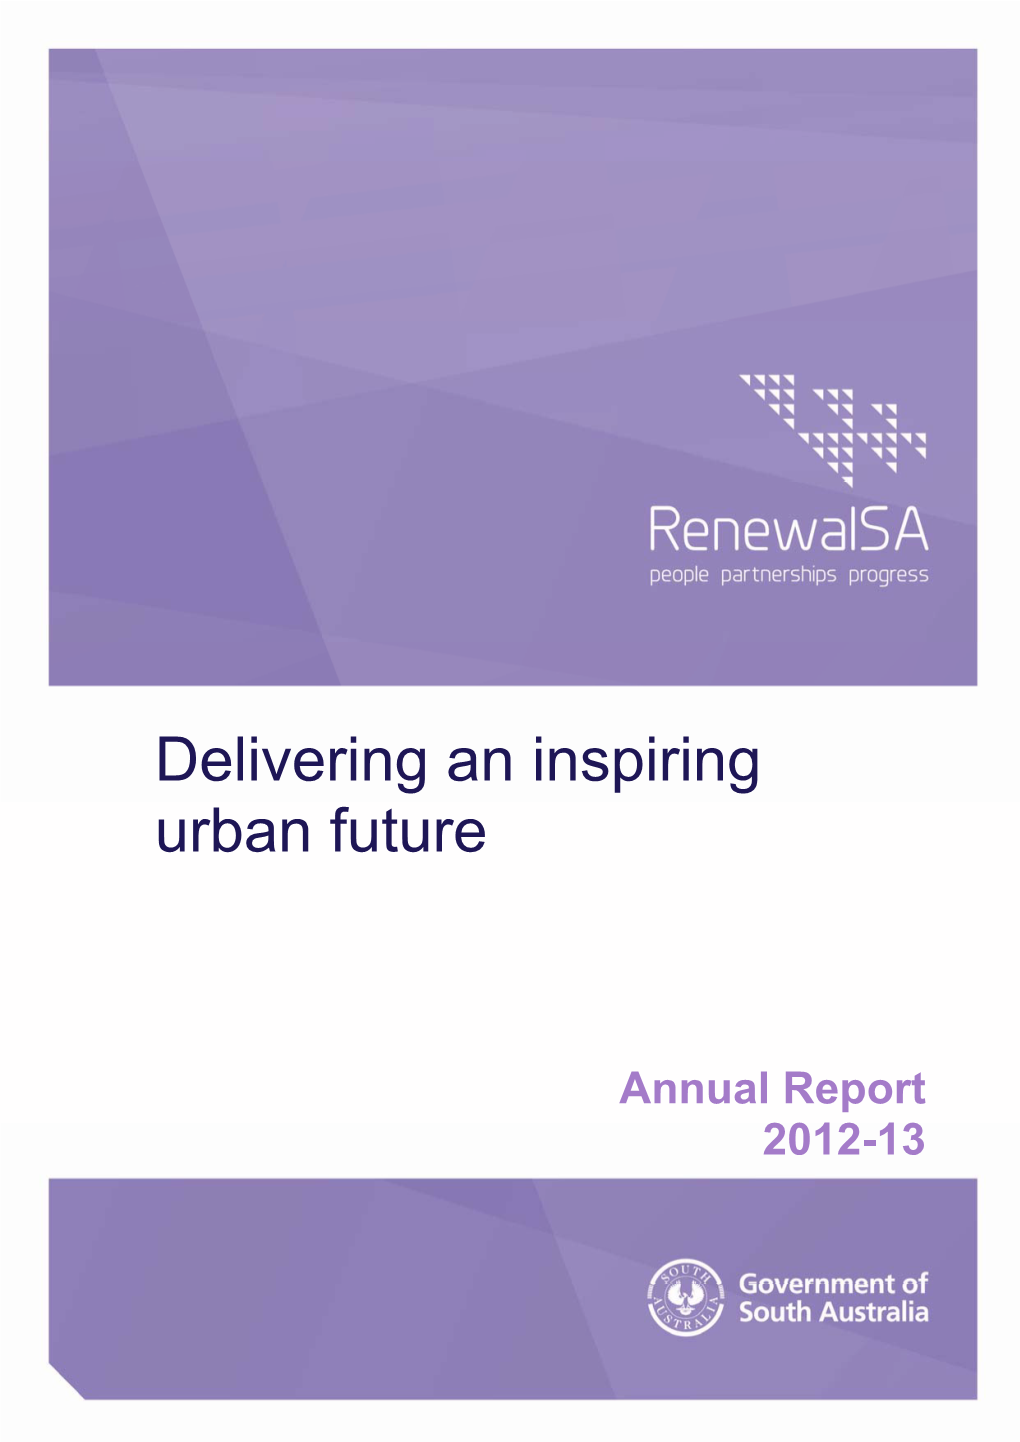 Delivering an Inspiring Urban Future